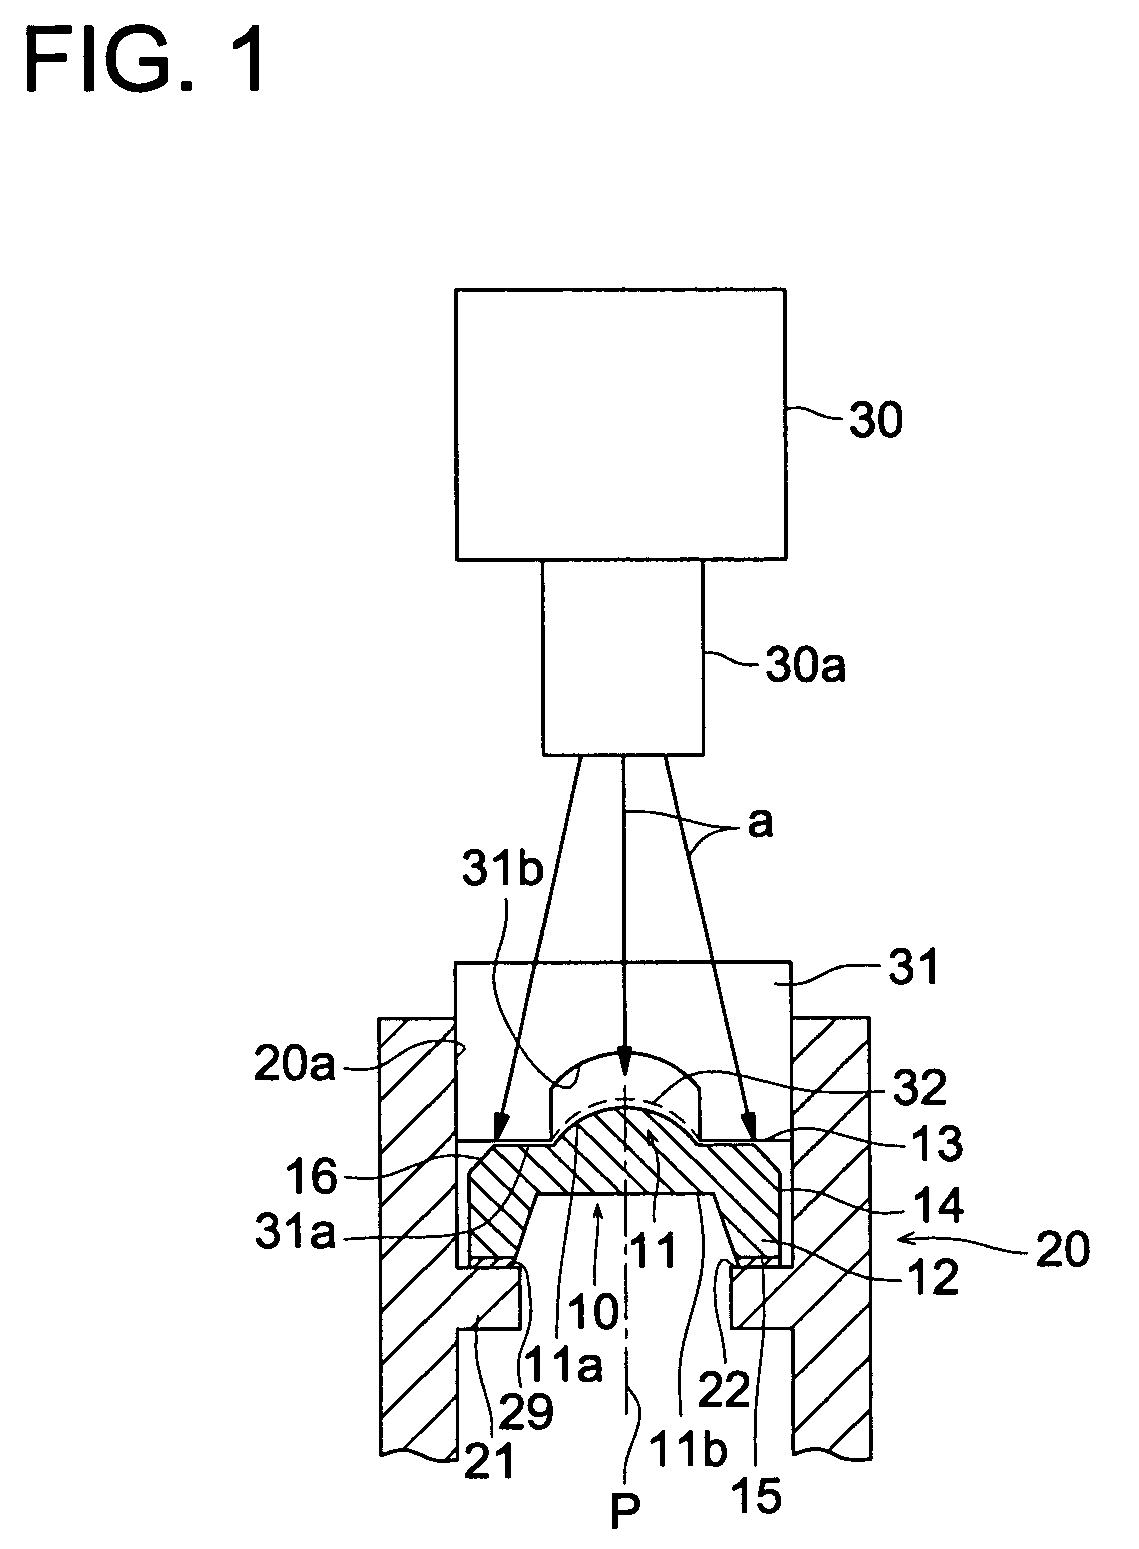 Method of fixing an optical element and method of manufacturing optical module including the use of a light transmissive loading jig